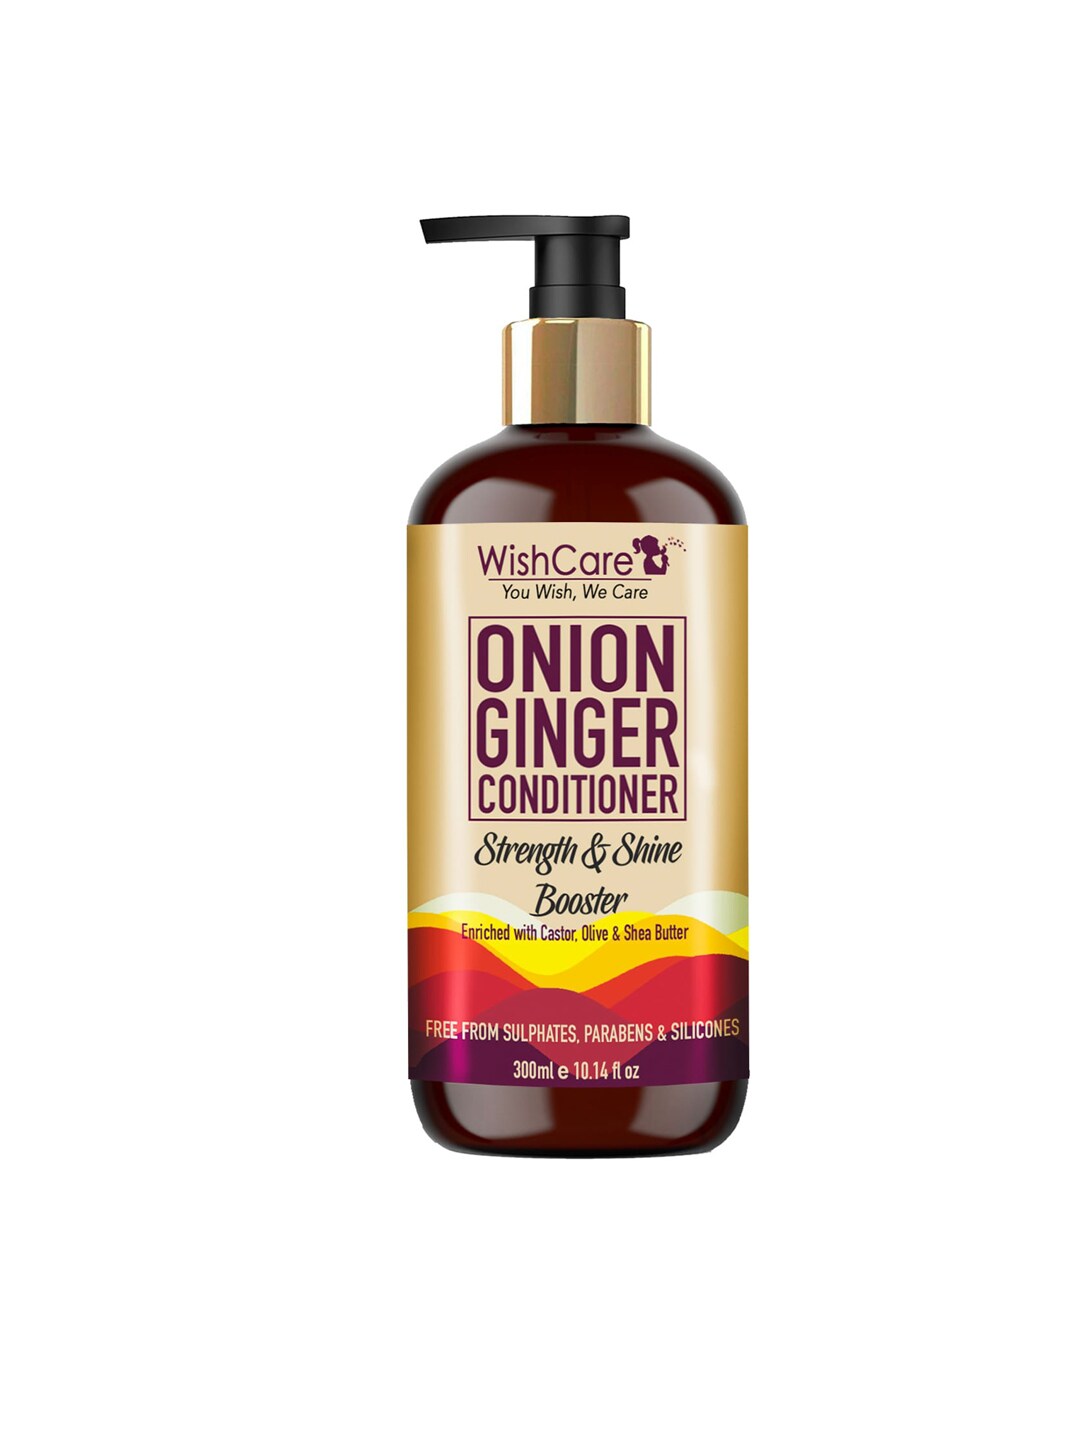 WishCare Onion Ginger Conditioner - Strength & Shine Booster Price in India